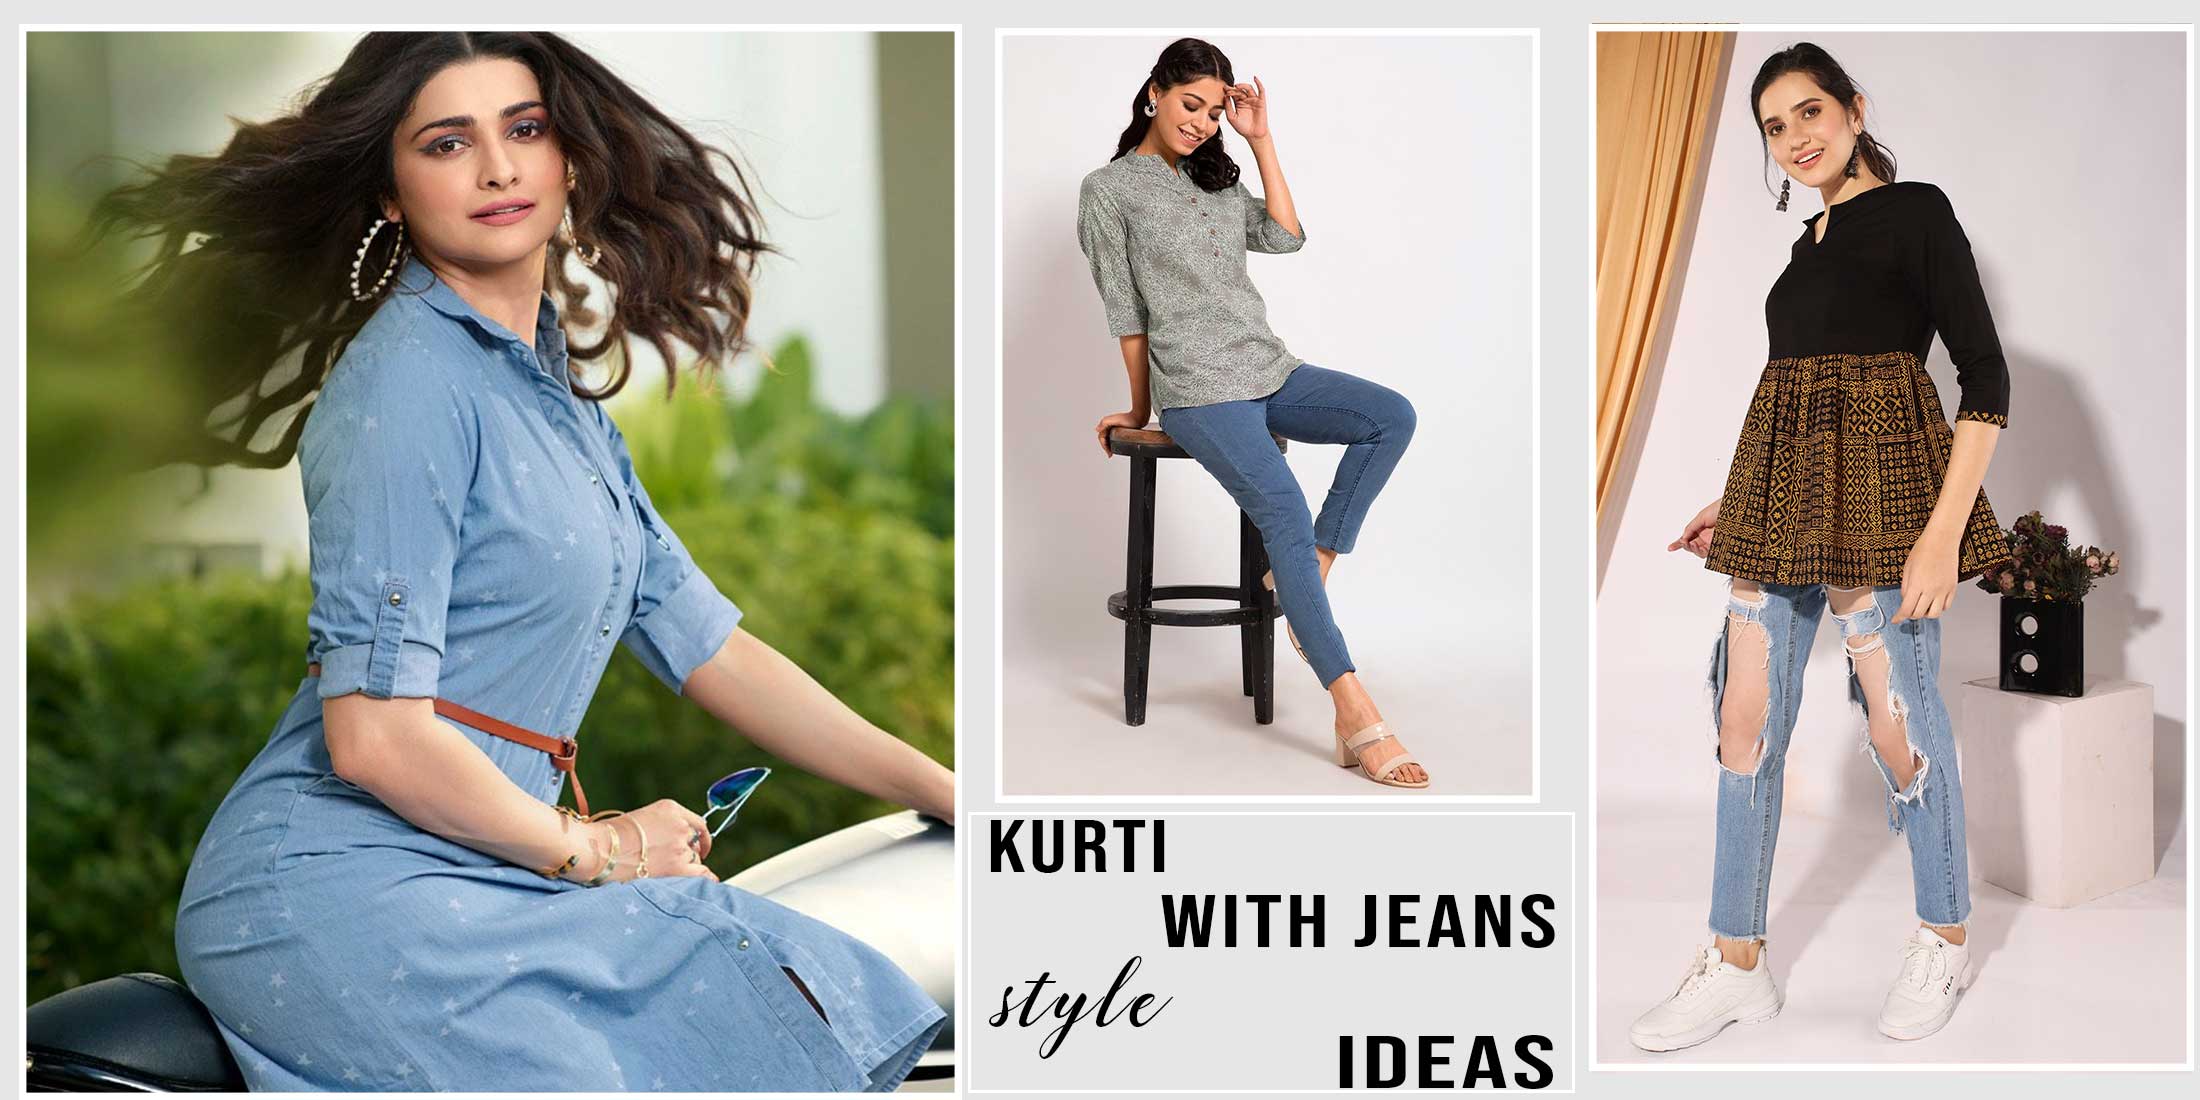 8 Kurti & Jeans Looks To Help You Nail The Indo-Western Style | LBB-saigonsouth.com.vn